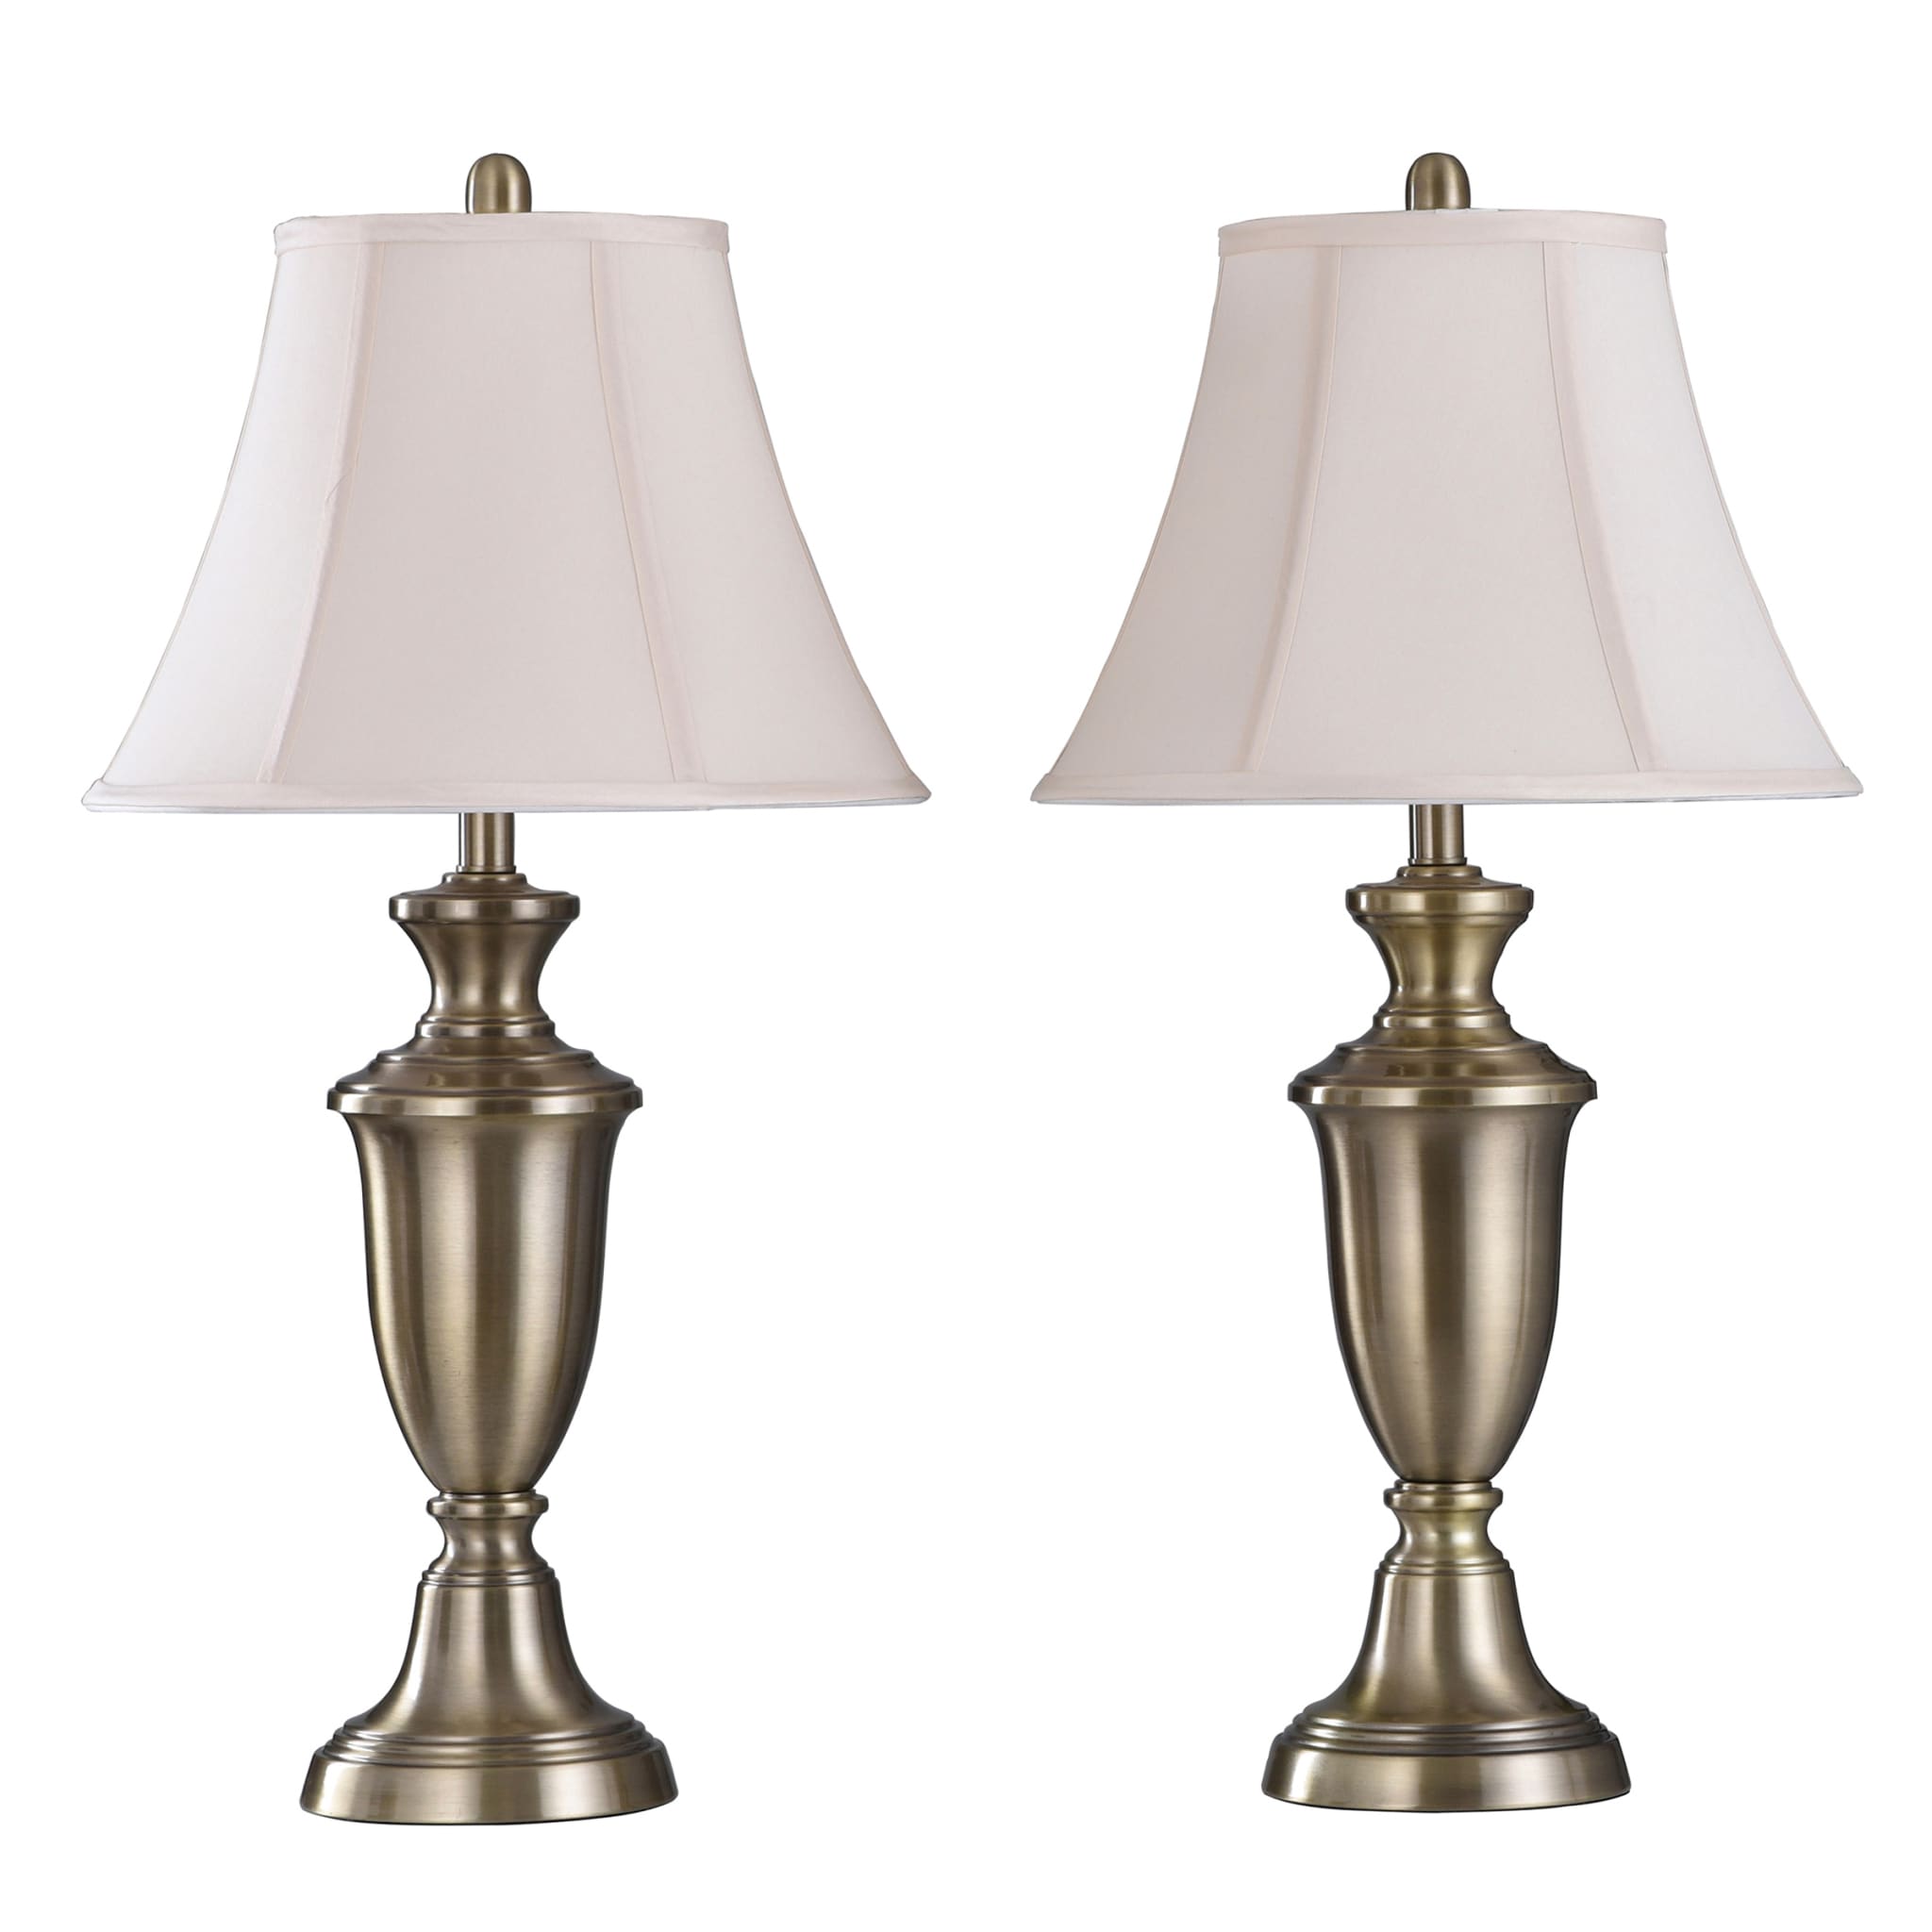 Antique Brass 3 Way Table Lamp, Are All Lamps 3 Way